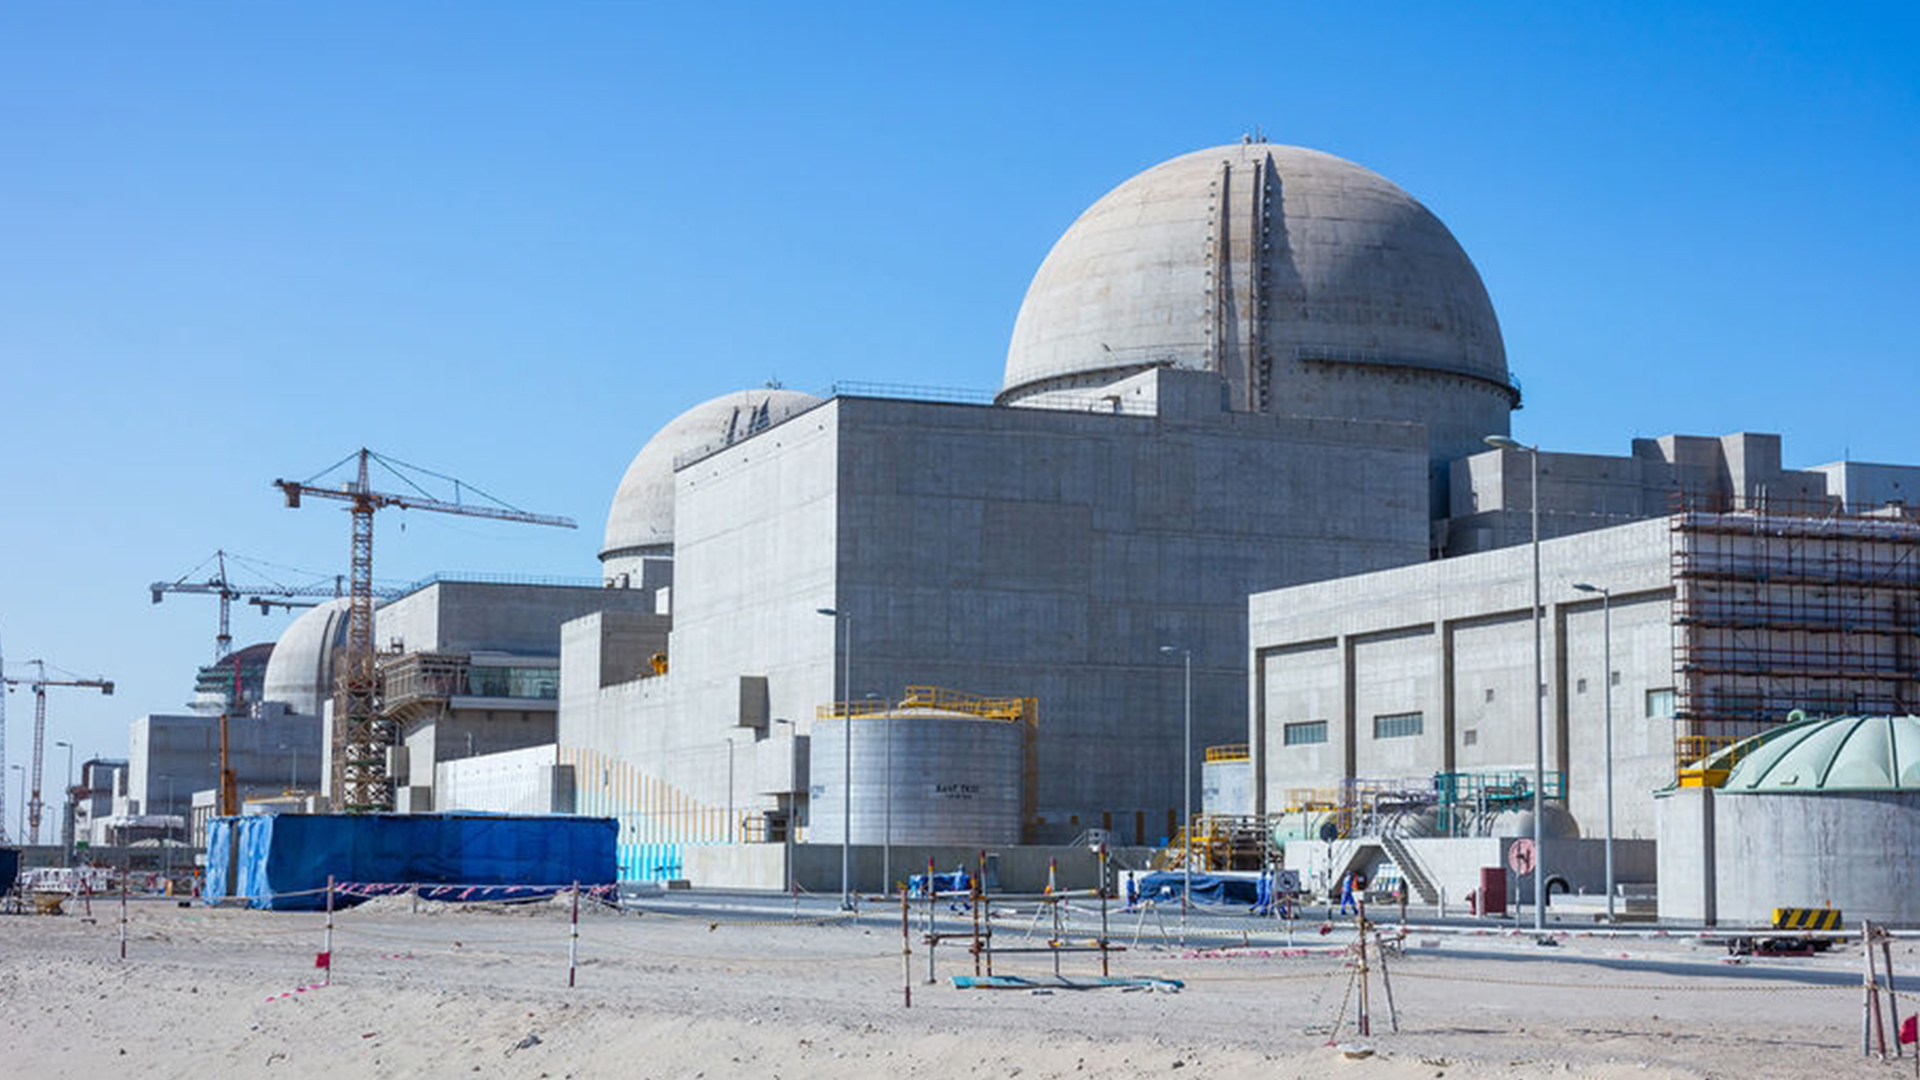 UAE becomes first in the Arab world to have a nuclear power reactor